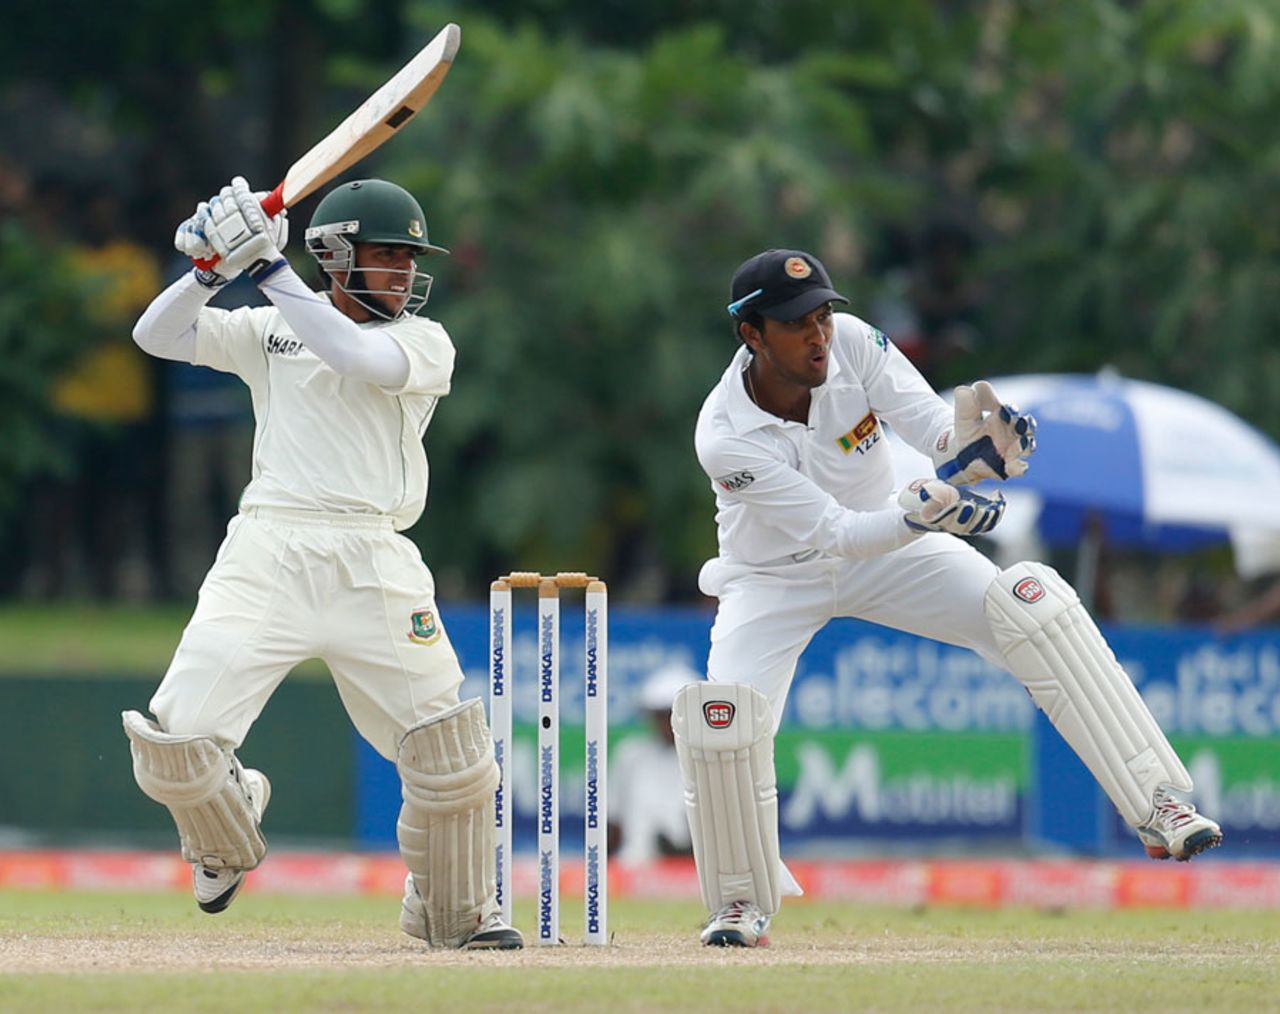 Mominul Haque cuts one square, Sri Lanka v Bangladesh, 1st Test, Day 3, Galle, March 10, 2013